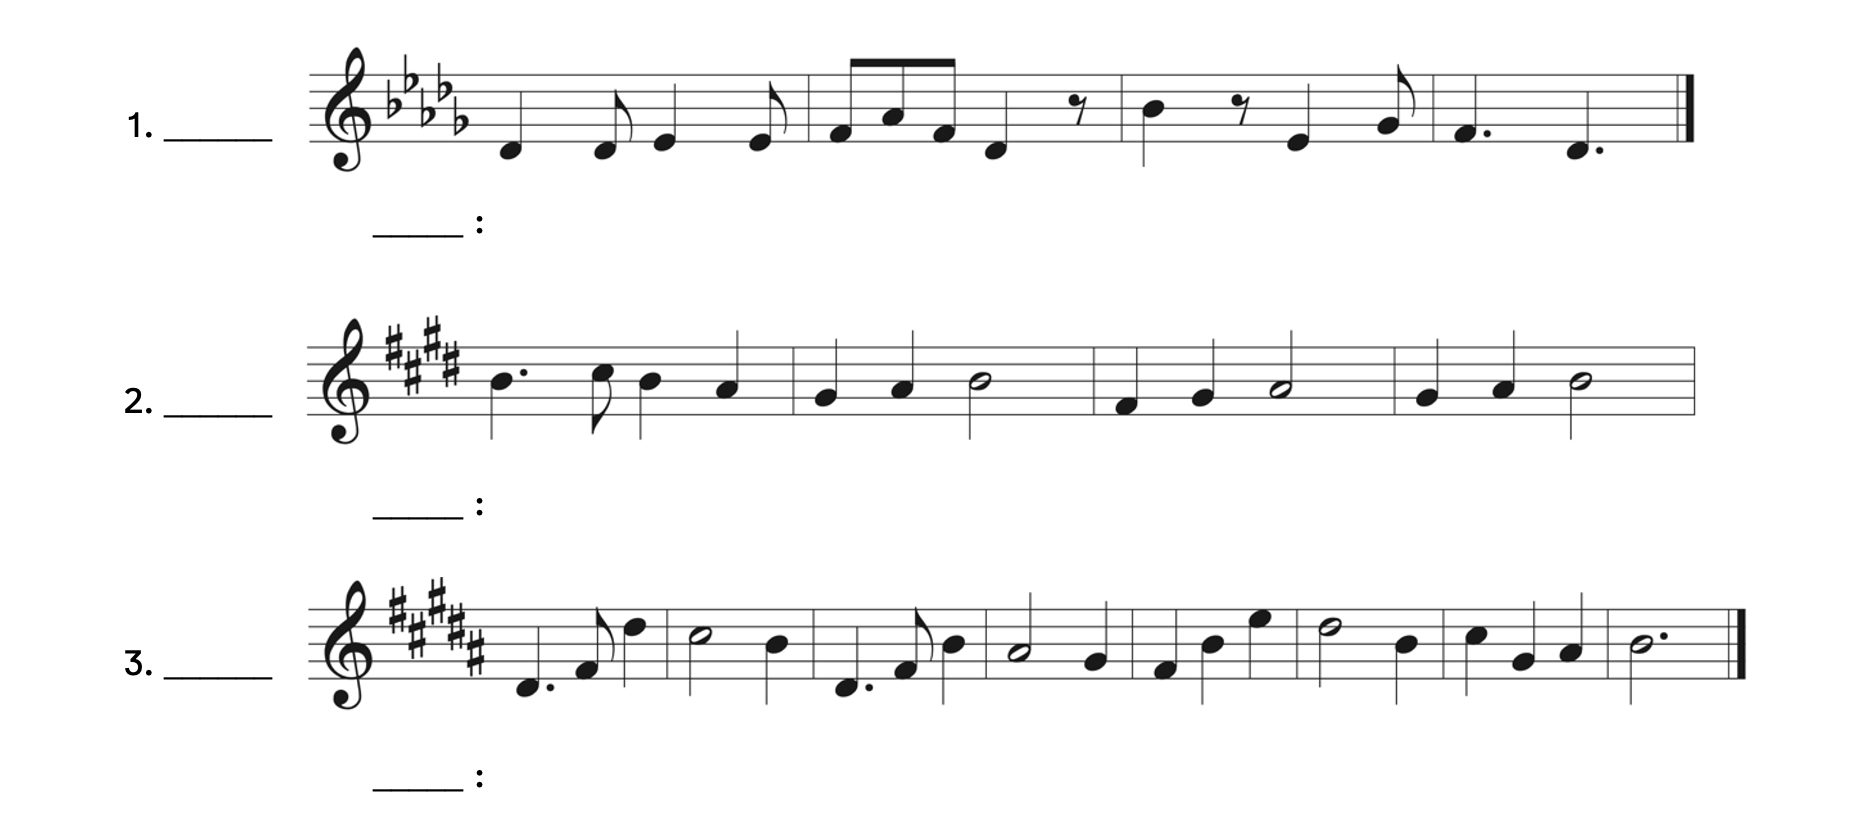 Number 1, 5 flats, first note is D-flat and last note is D-flat. First measure has a quarter note, eighth note, quarter note and eighth note. Second measure has three eighth notes, a quarter note and an eighth rest. Third measure has a quarter note, eighth rest, quarter note, and eighth note. Fourth measure has two dotted quarter notes. Number two has four sharps. First and last notes are B. First measure has a dotted quarter note, eighth note, and two quarter notes. The last three measures have two quarter notes followed by a half note. Number 3 has 5 sharps. The first note is D-sharp and the last note is B. The first measure has a dotted quarter note, eighth note, and quarter note. The second measure has a half note and quarter note. Measure 3 and 4 are the same rhythmically as measures 1 and 2. Measure 5 has 3 quarter notes. Measure 6 has a half note and quarter note. Measure 7 has 3 quarter notes. Measure 8 ends with a dotted half note.